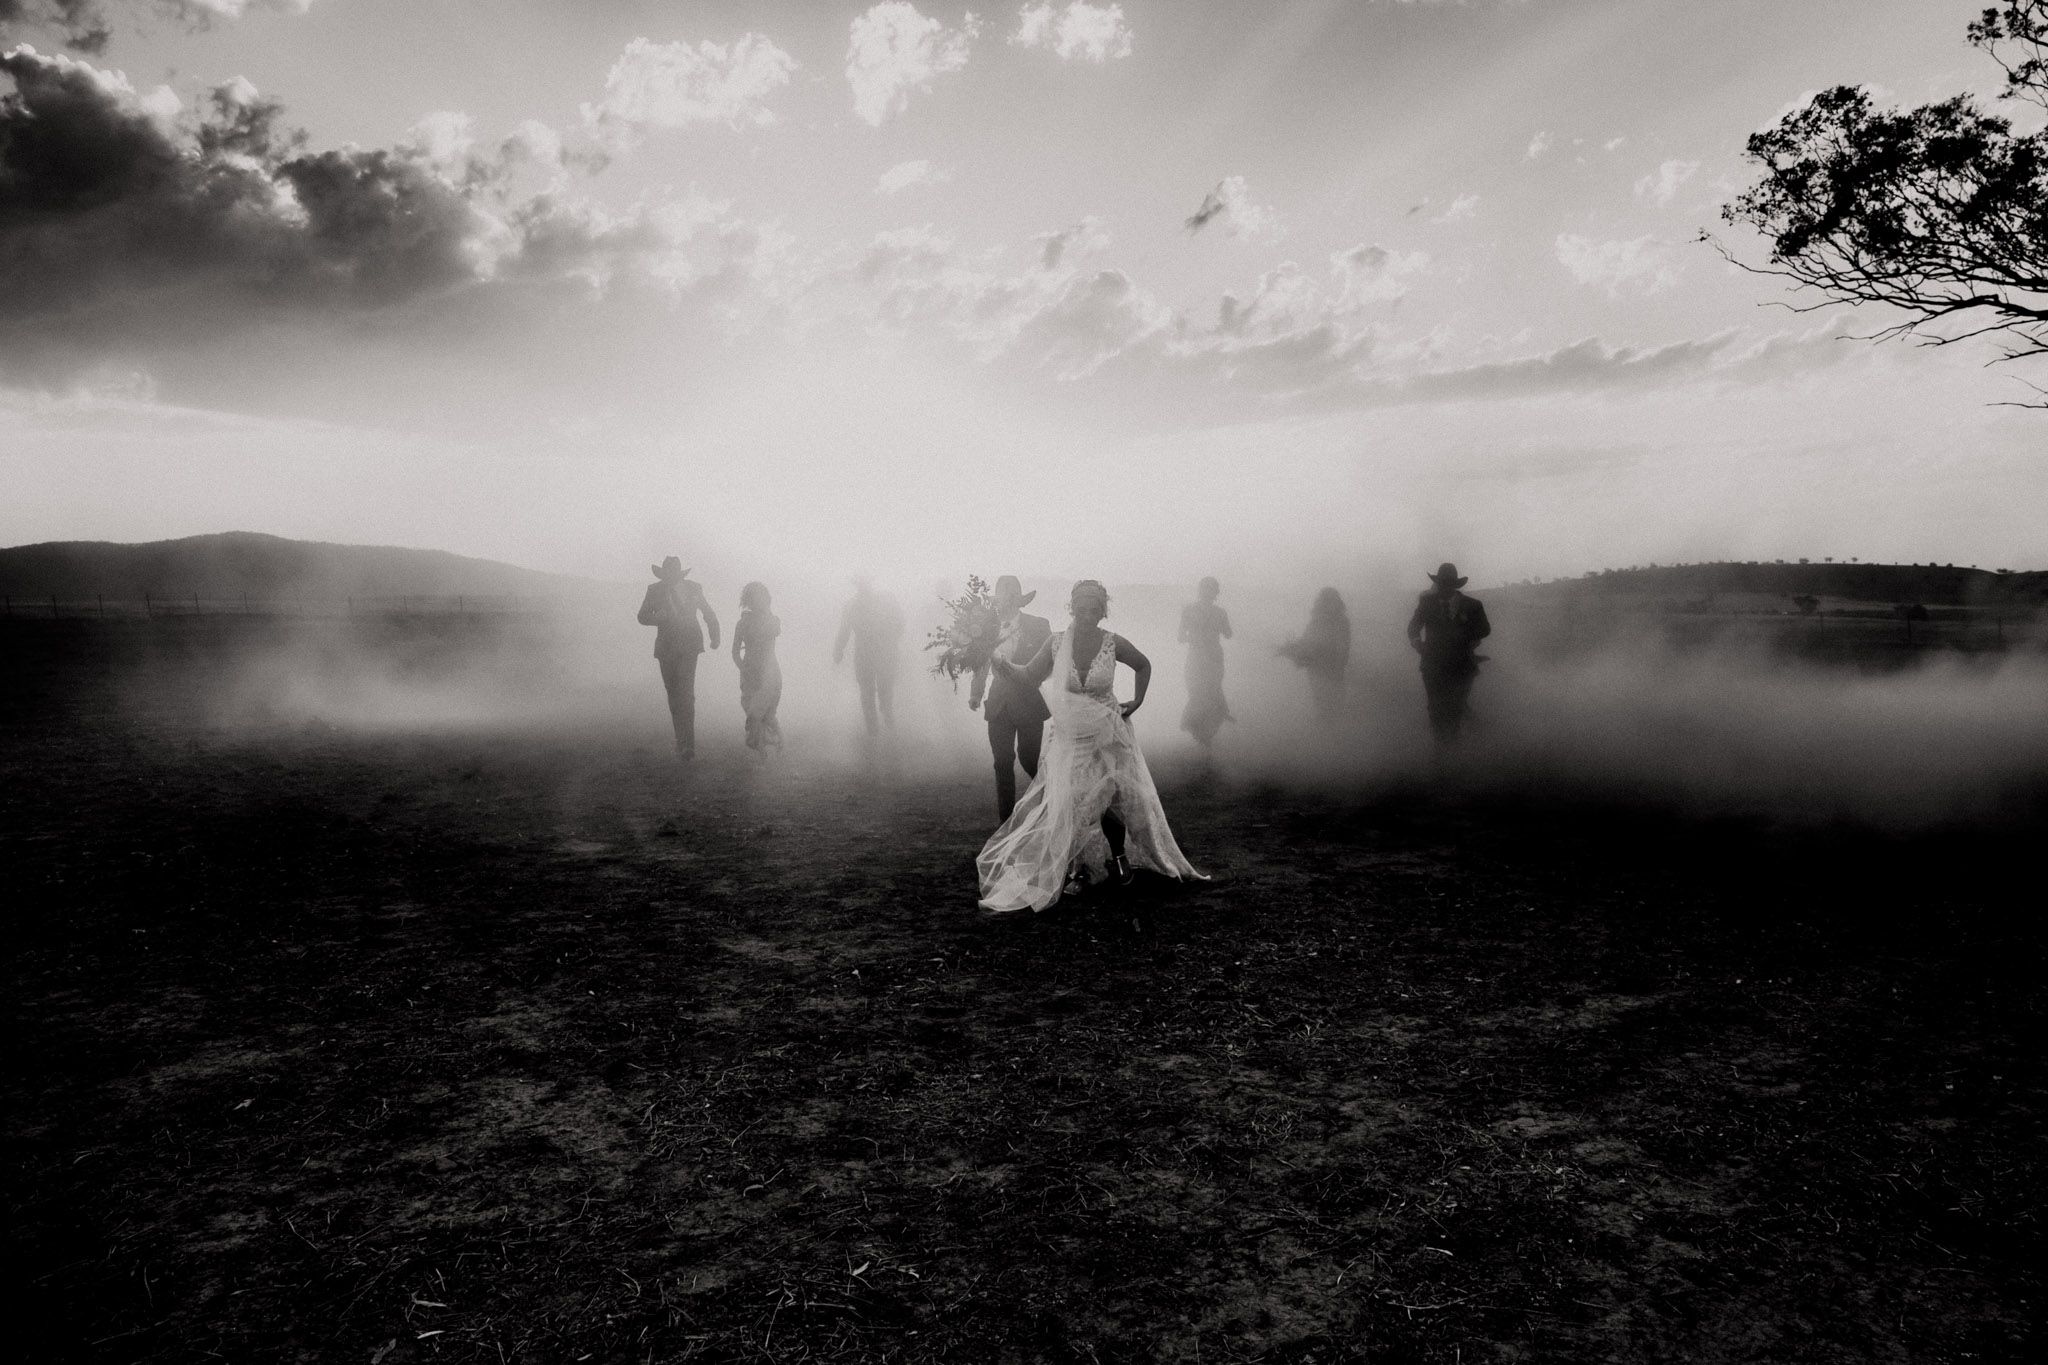 Bridal party wedding running out of dust storm